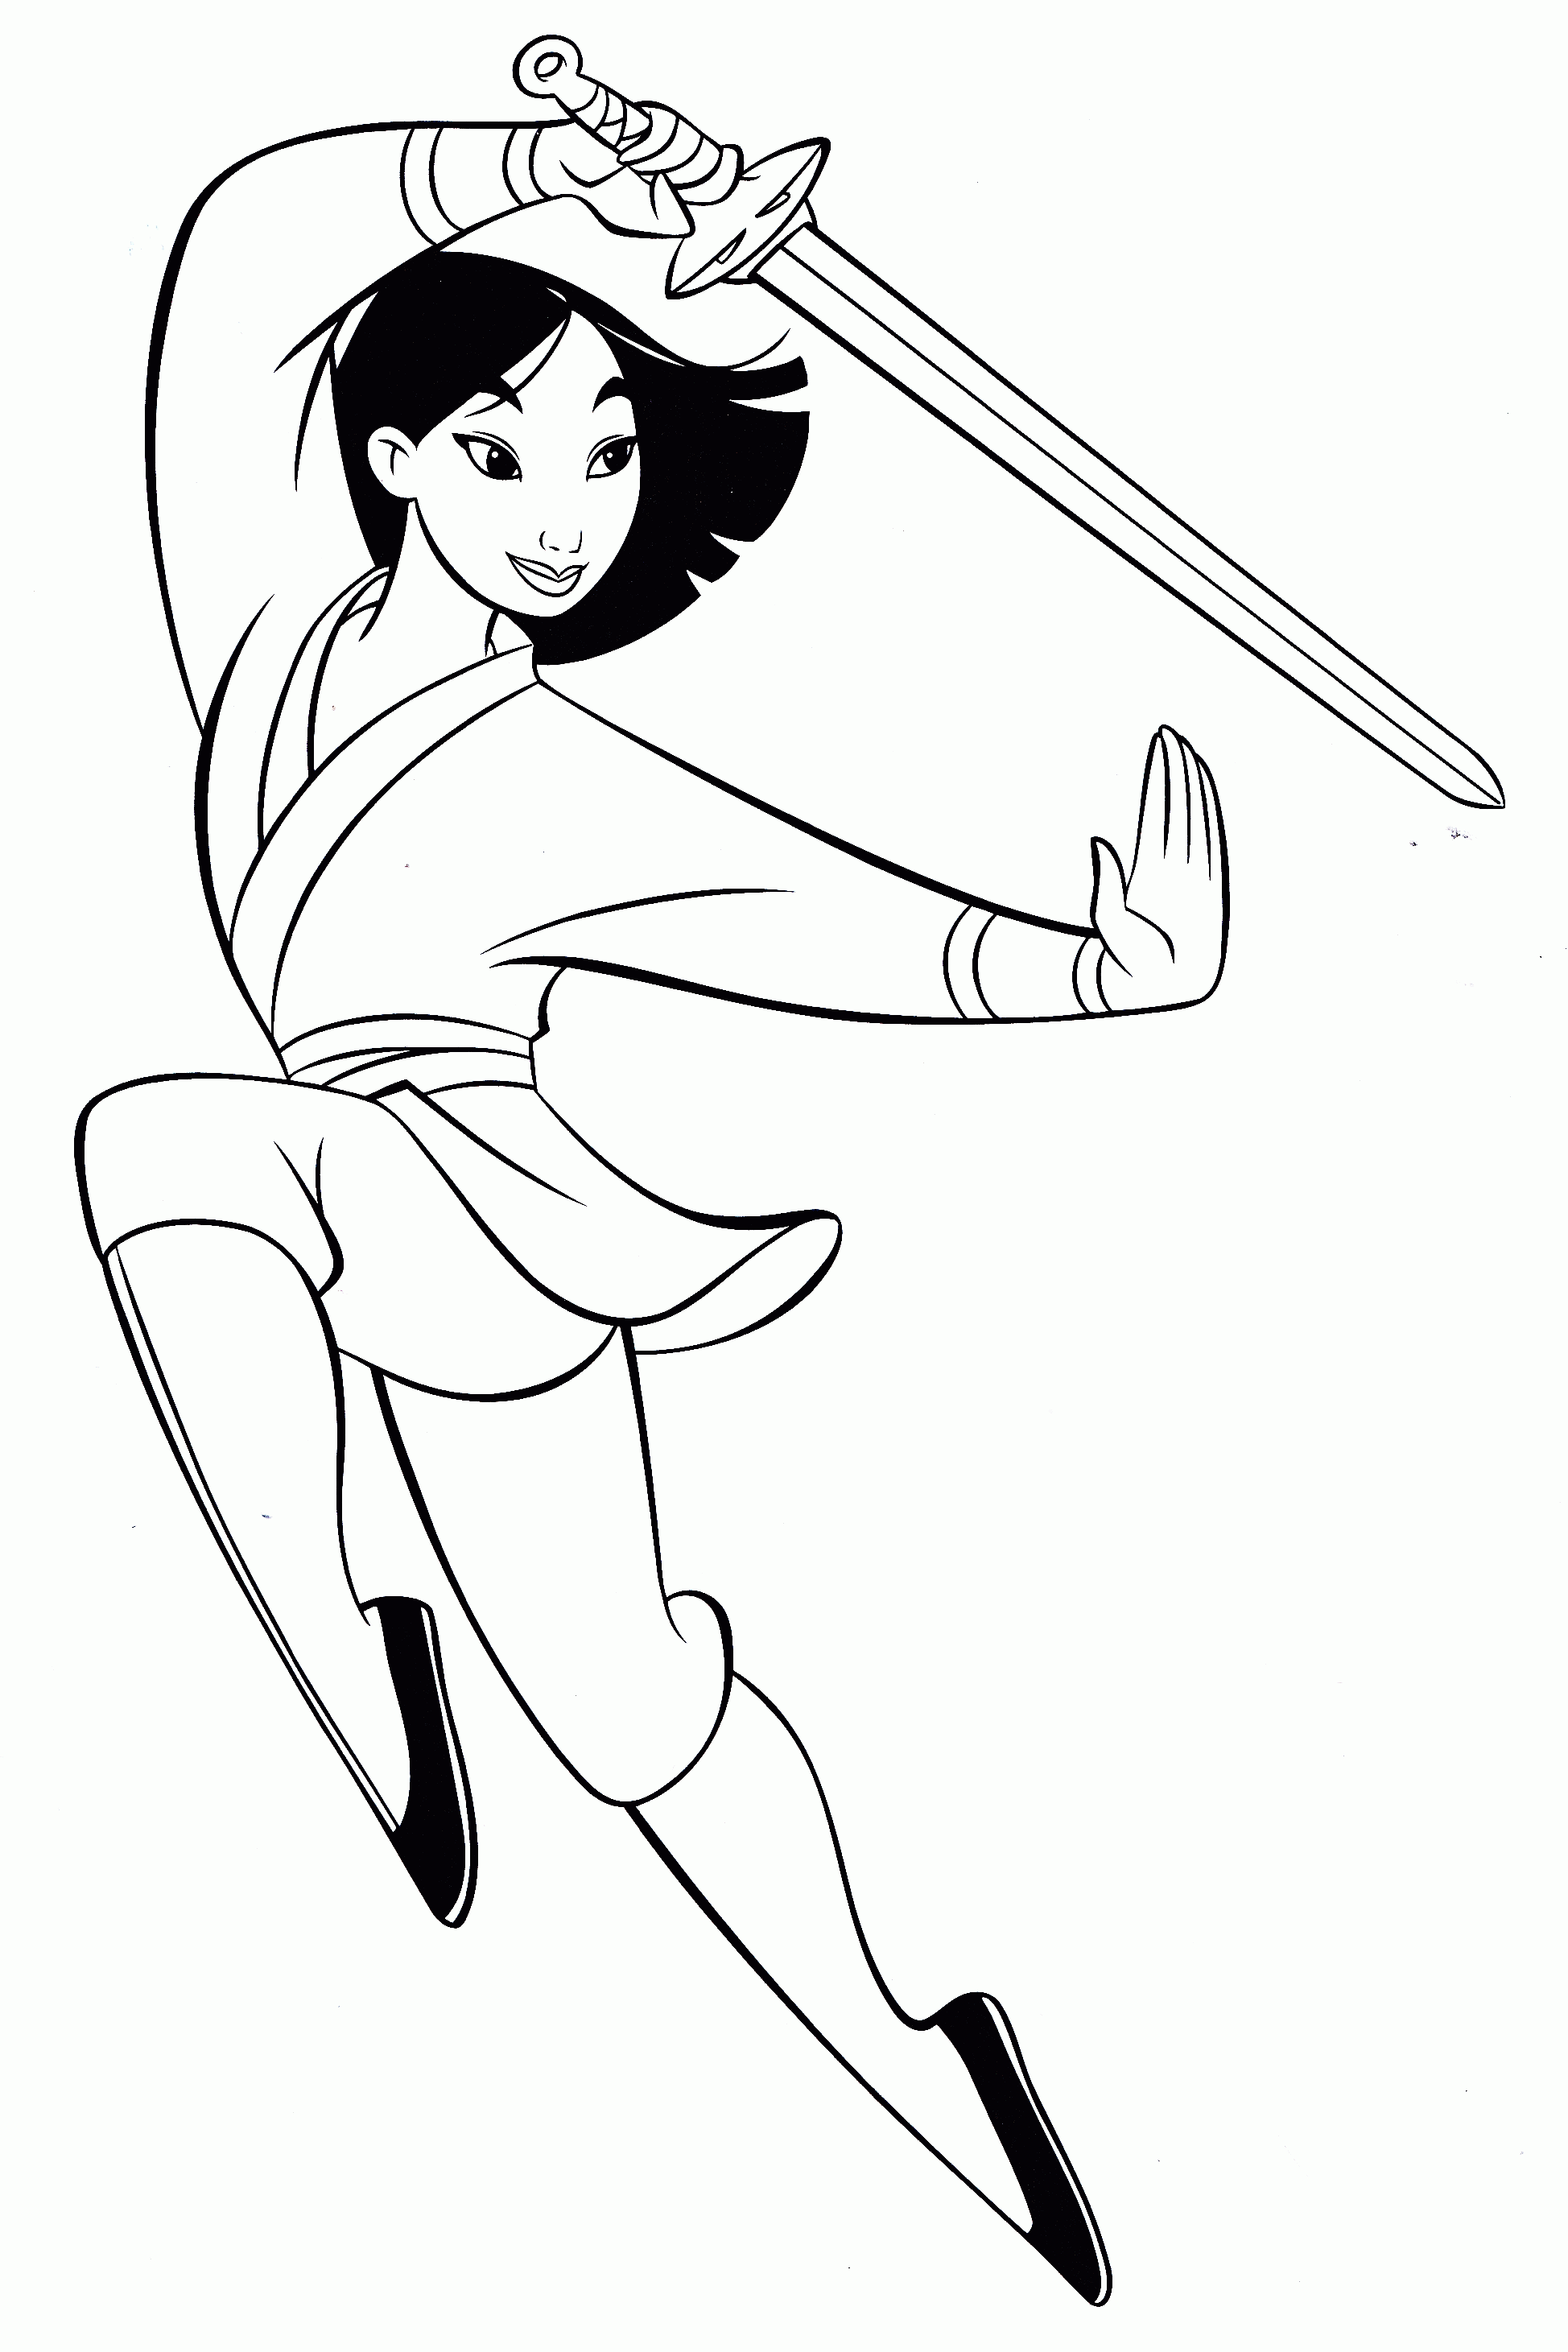 Mulan Free Coloring Pages   Coloring Home